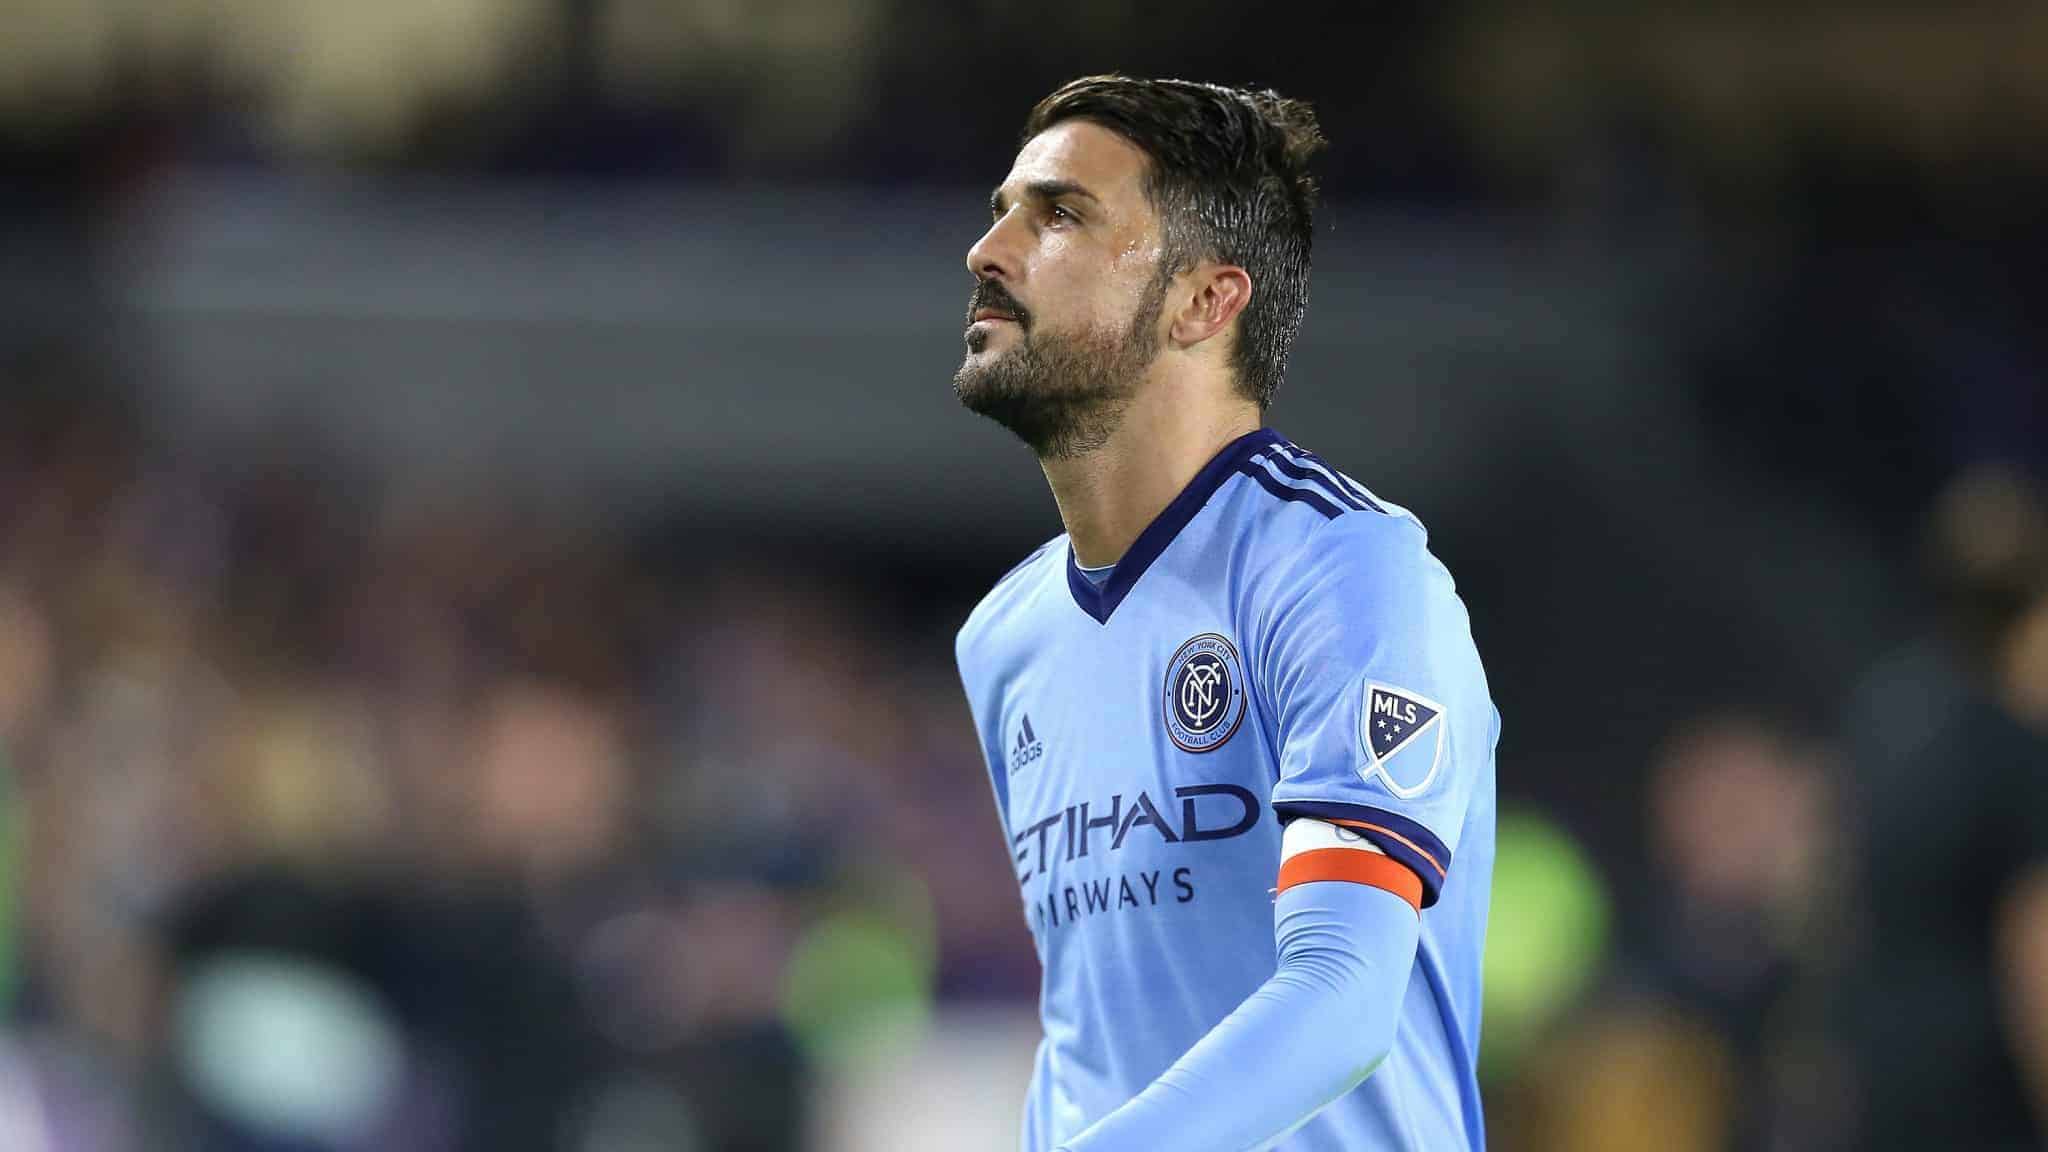 ORLANDO, FL - MARCH 05: David Villa #7 of New York City FC is seen on the field during a MLS soccer match between New York City FC and Orlando City SC at the Orlando City Stadium on March 5, 2017 in Orlando, Florida.